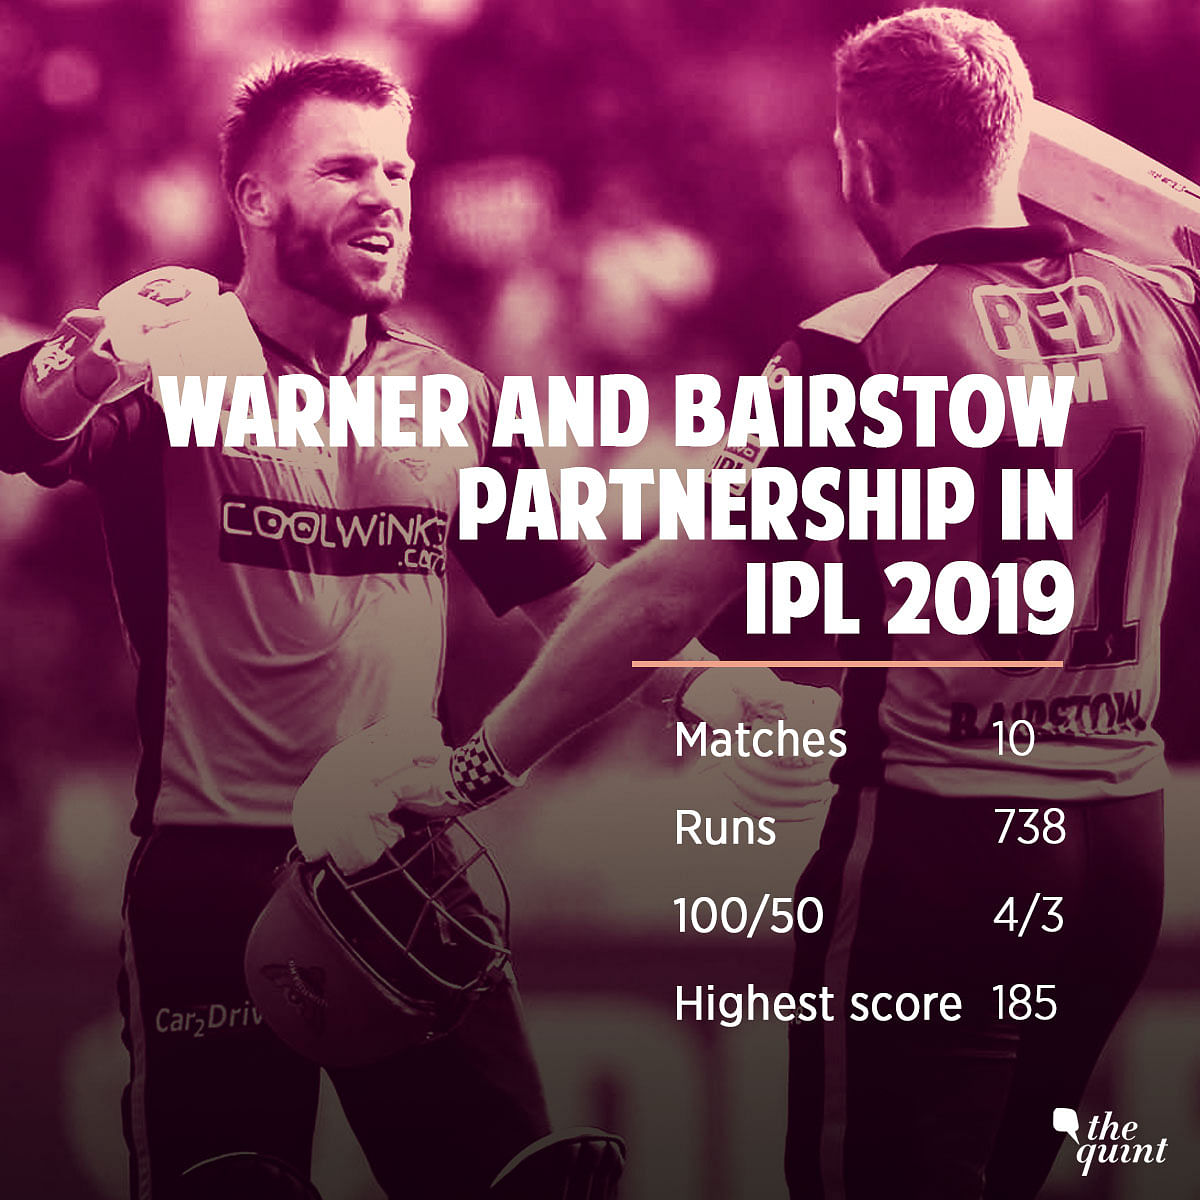 David Warner tops the run-getters list in IPL 2019, with seven fifties and a century from 10 matches